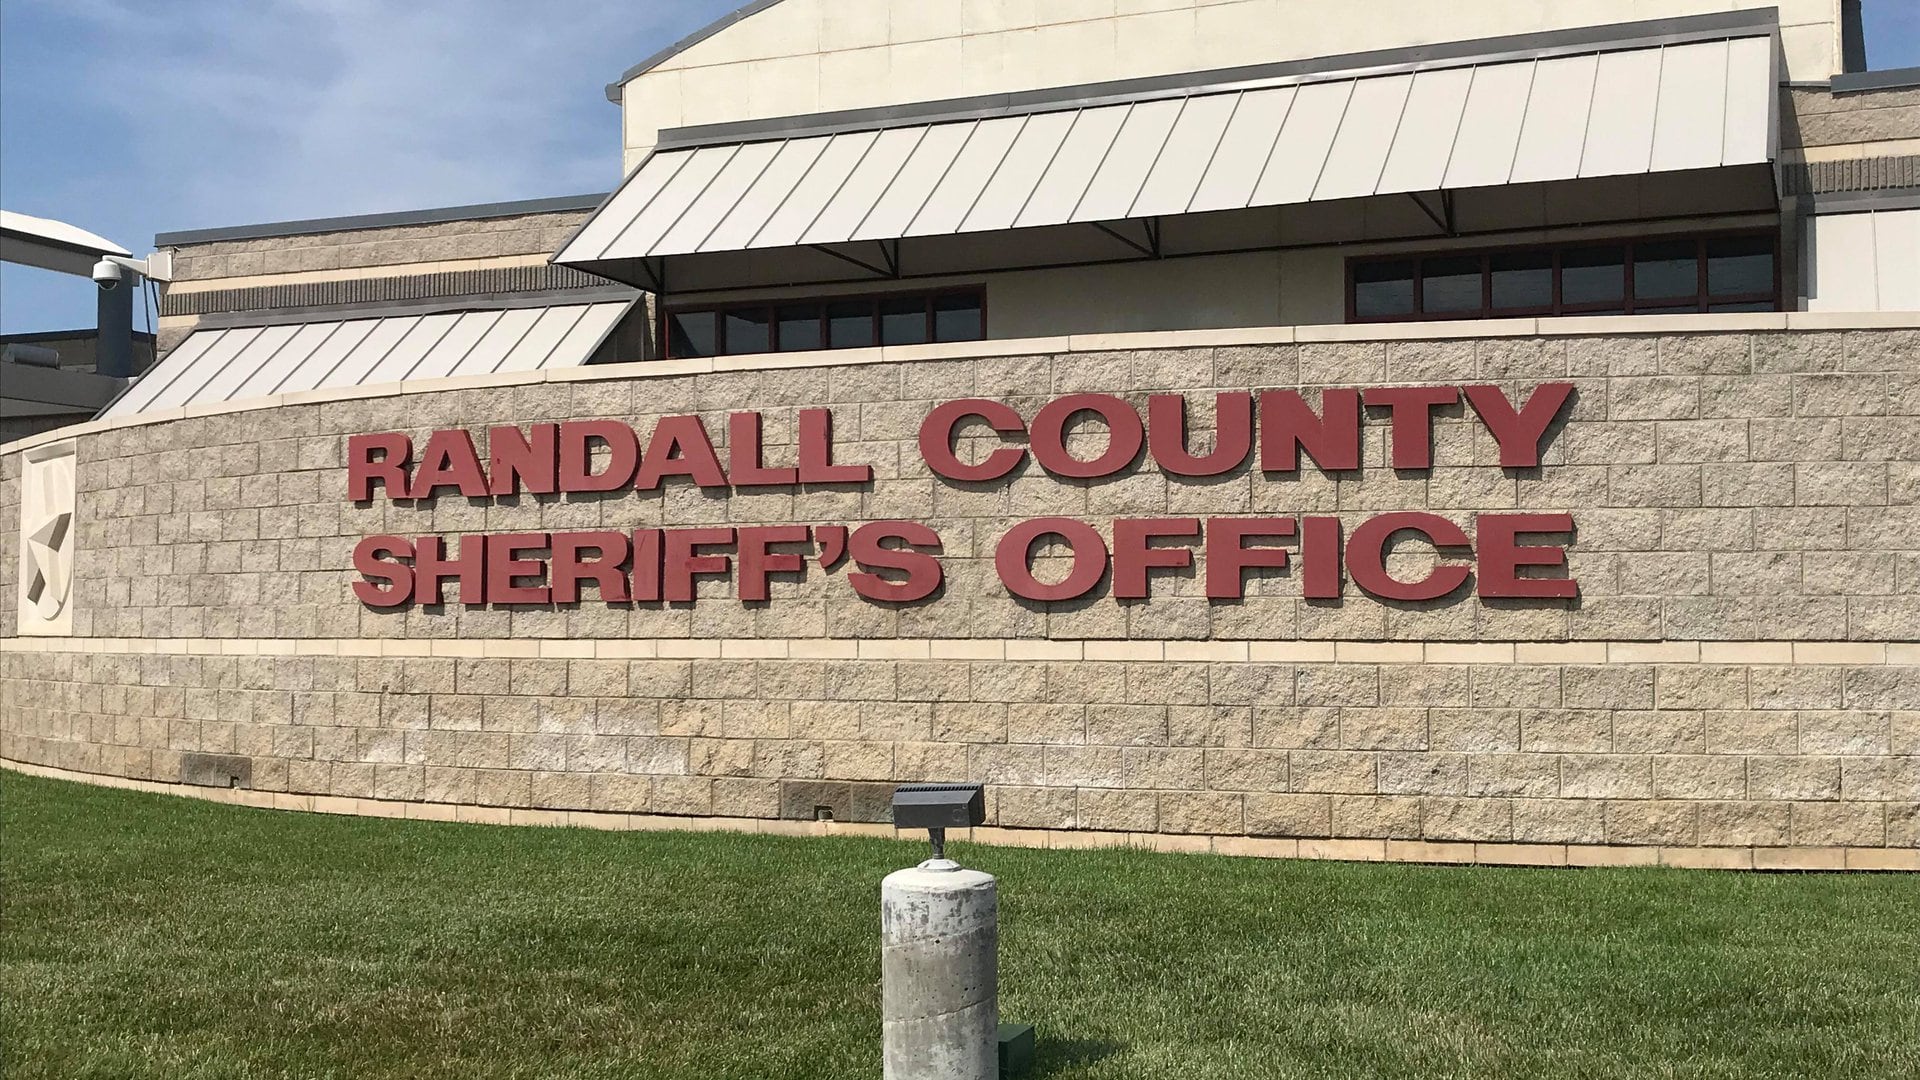 Image of Randall County Sheriff's Office